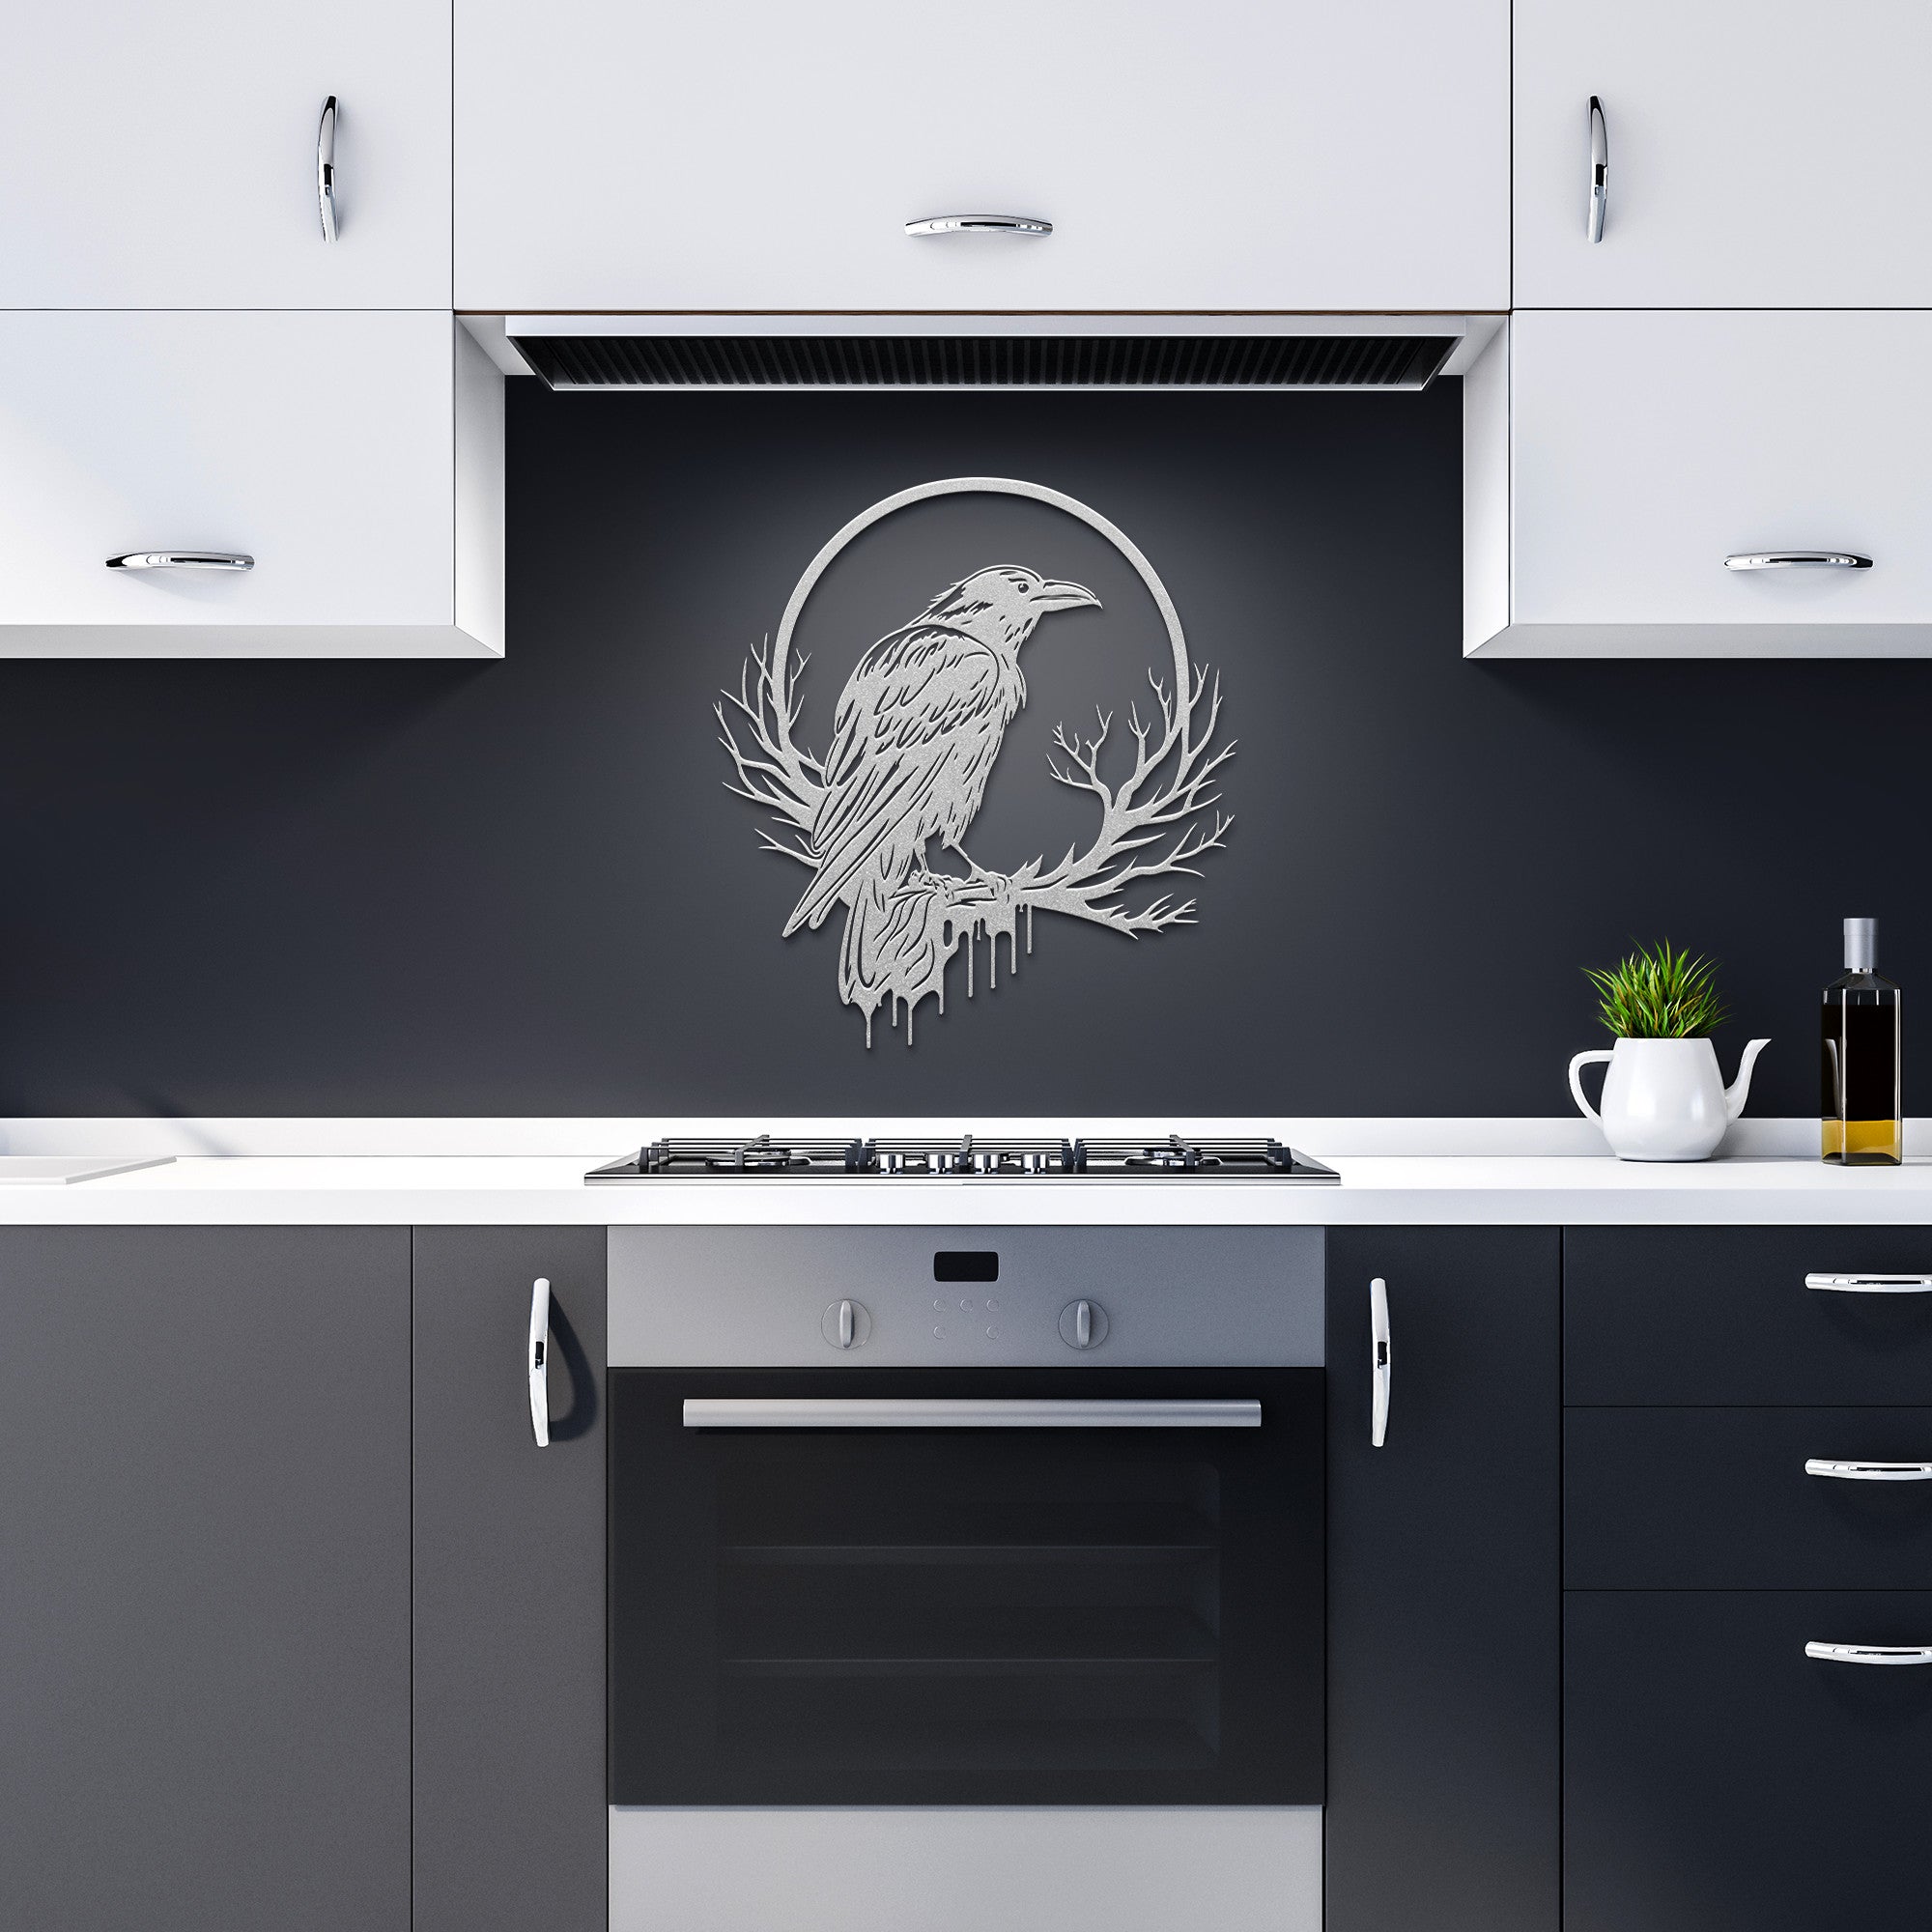 Raven Moon Sign - Cool Metal Signs